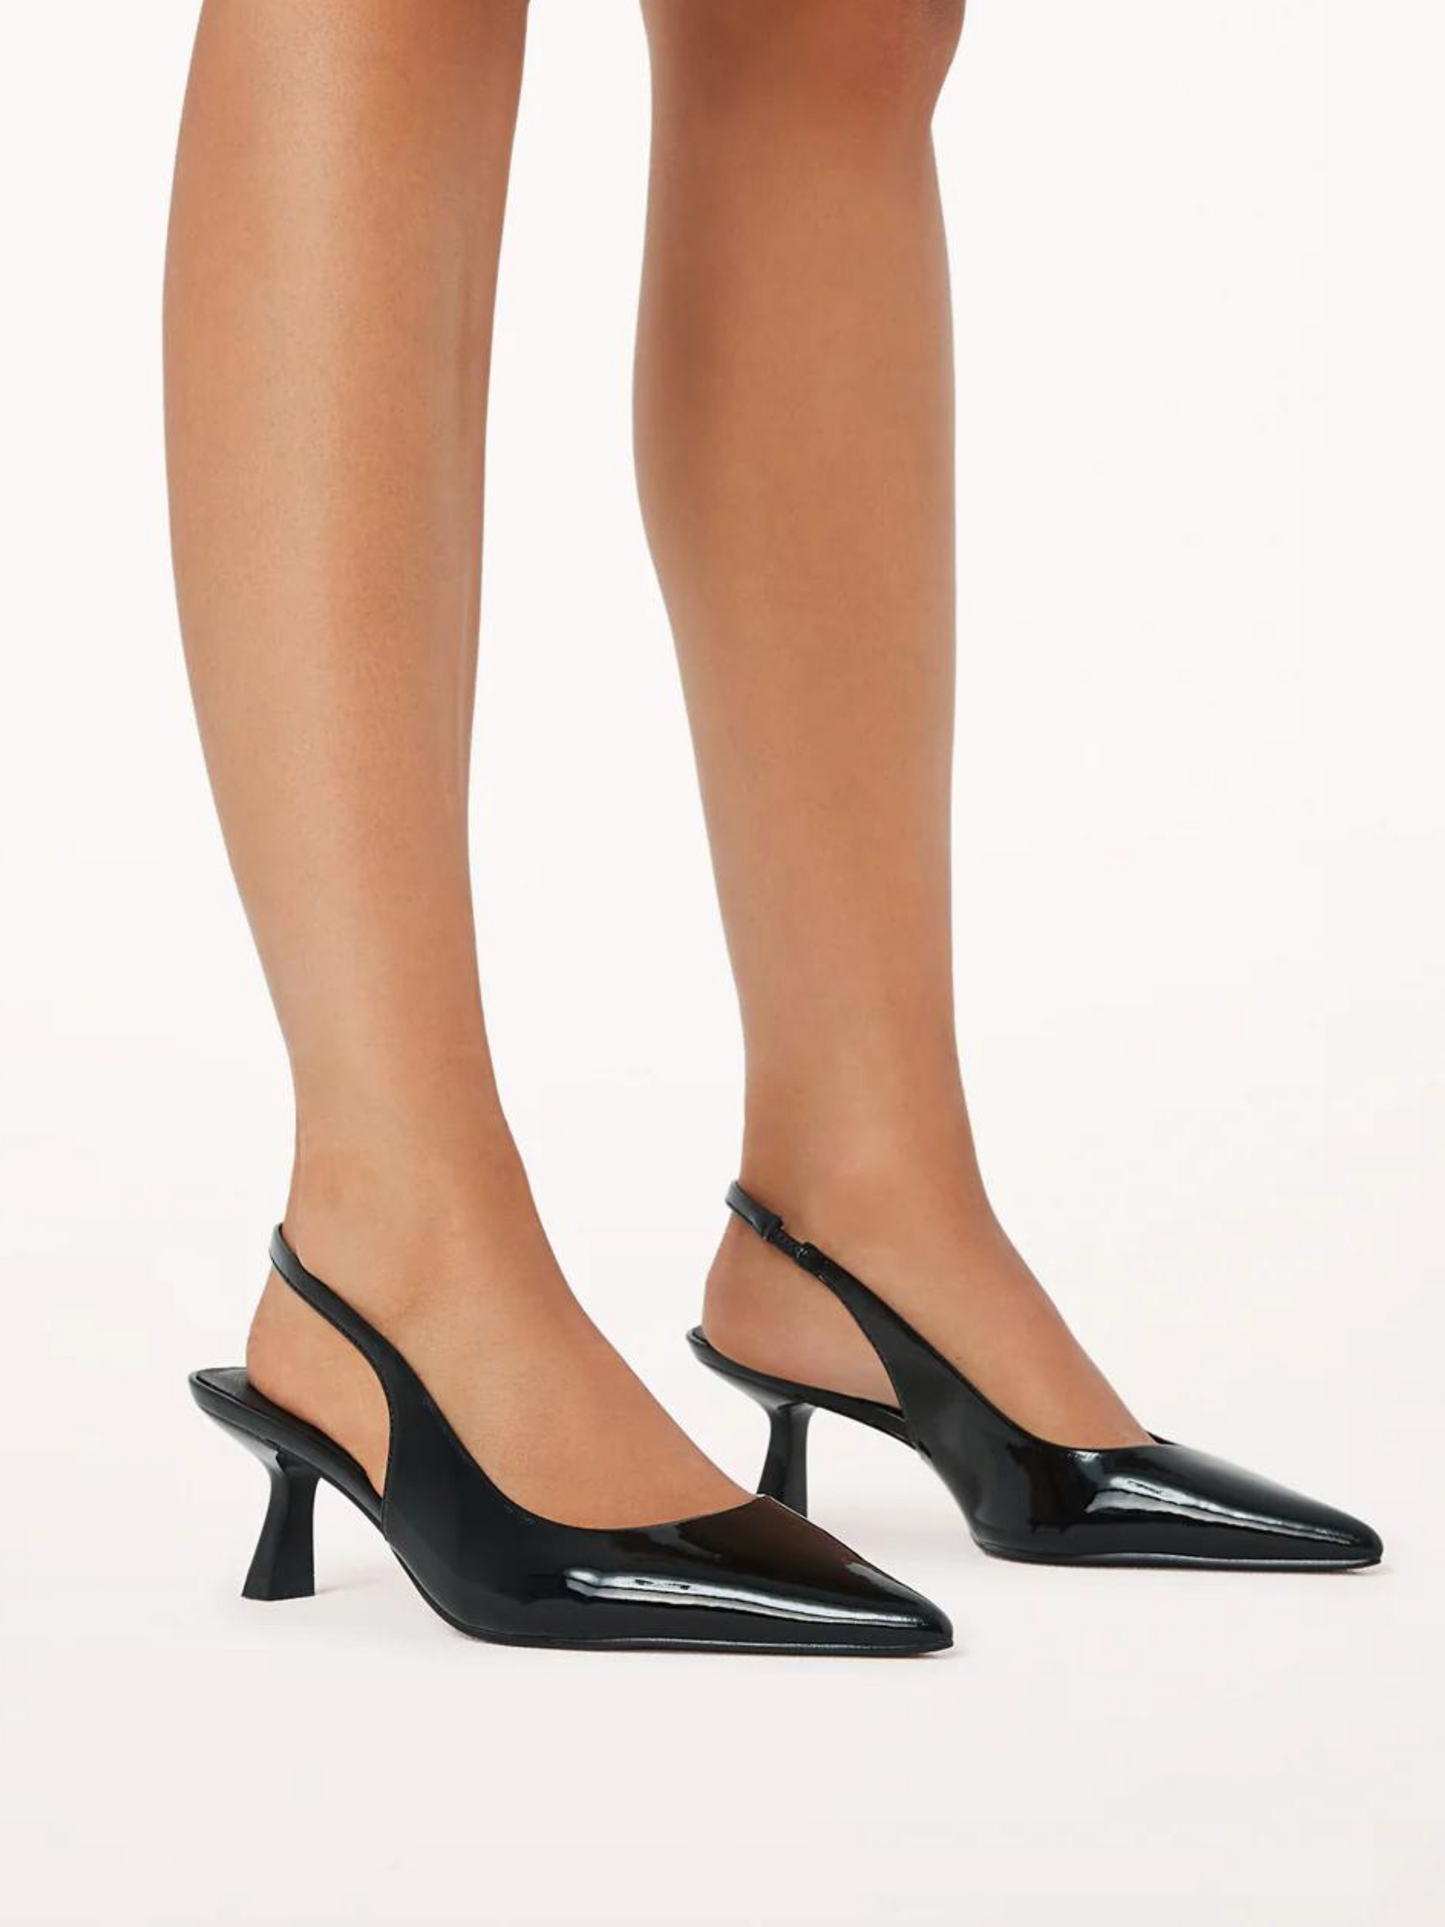 BILLINI AYLA POINTED PUMP IN BLACK PATENT - THE HIP EAGLE BOUTIQUE